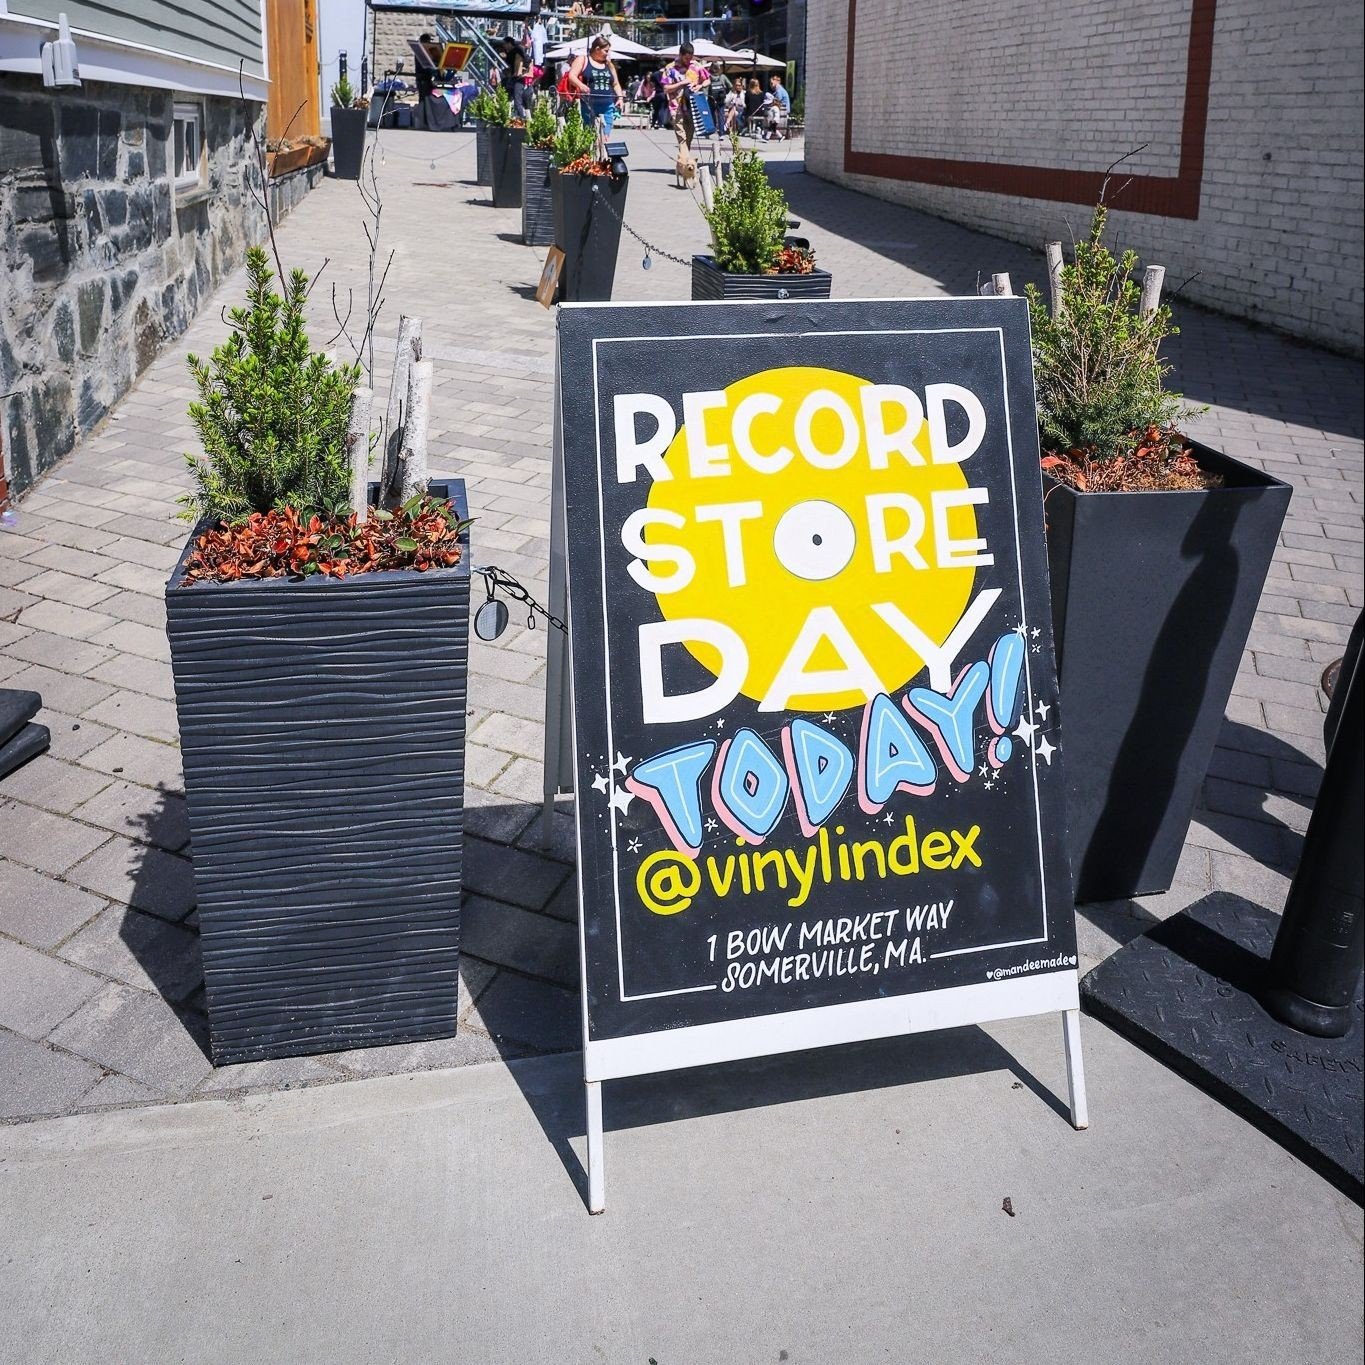 Today is the day! Doors at @vinylindex open at 9am and courtyard festivities kick off at noon. RSD exclusives, live screen printing RSD merch, DJs, specials, and more 🎵